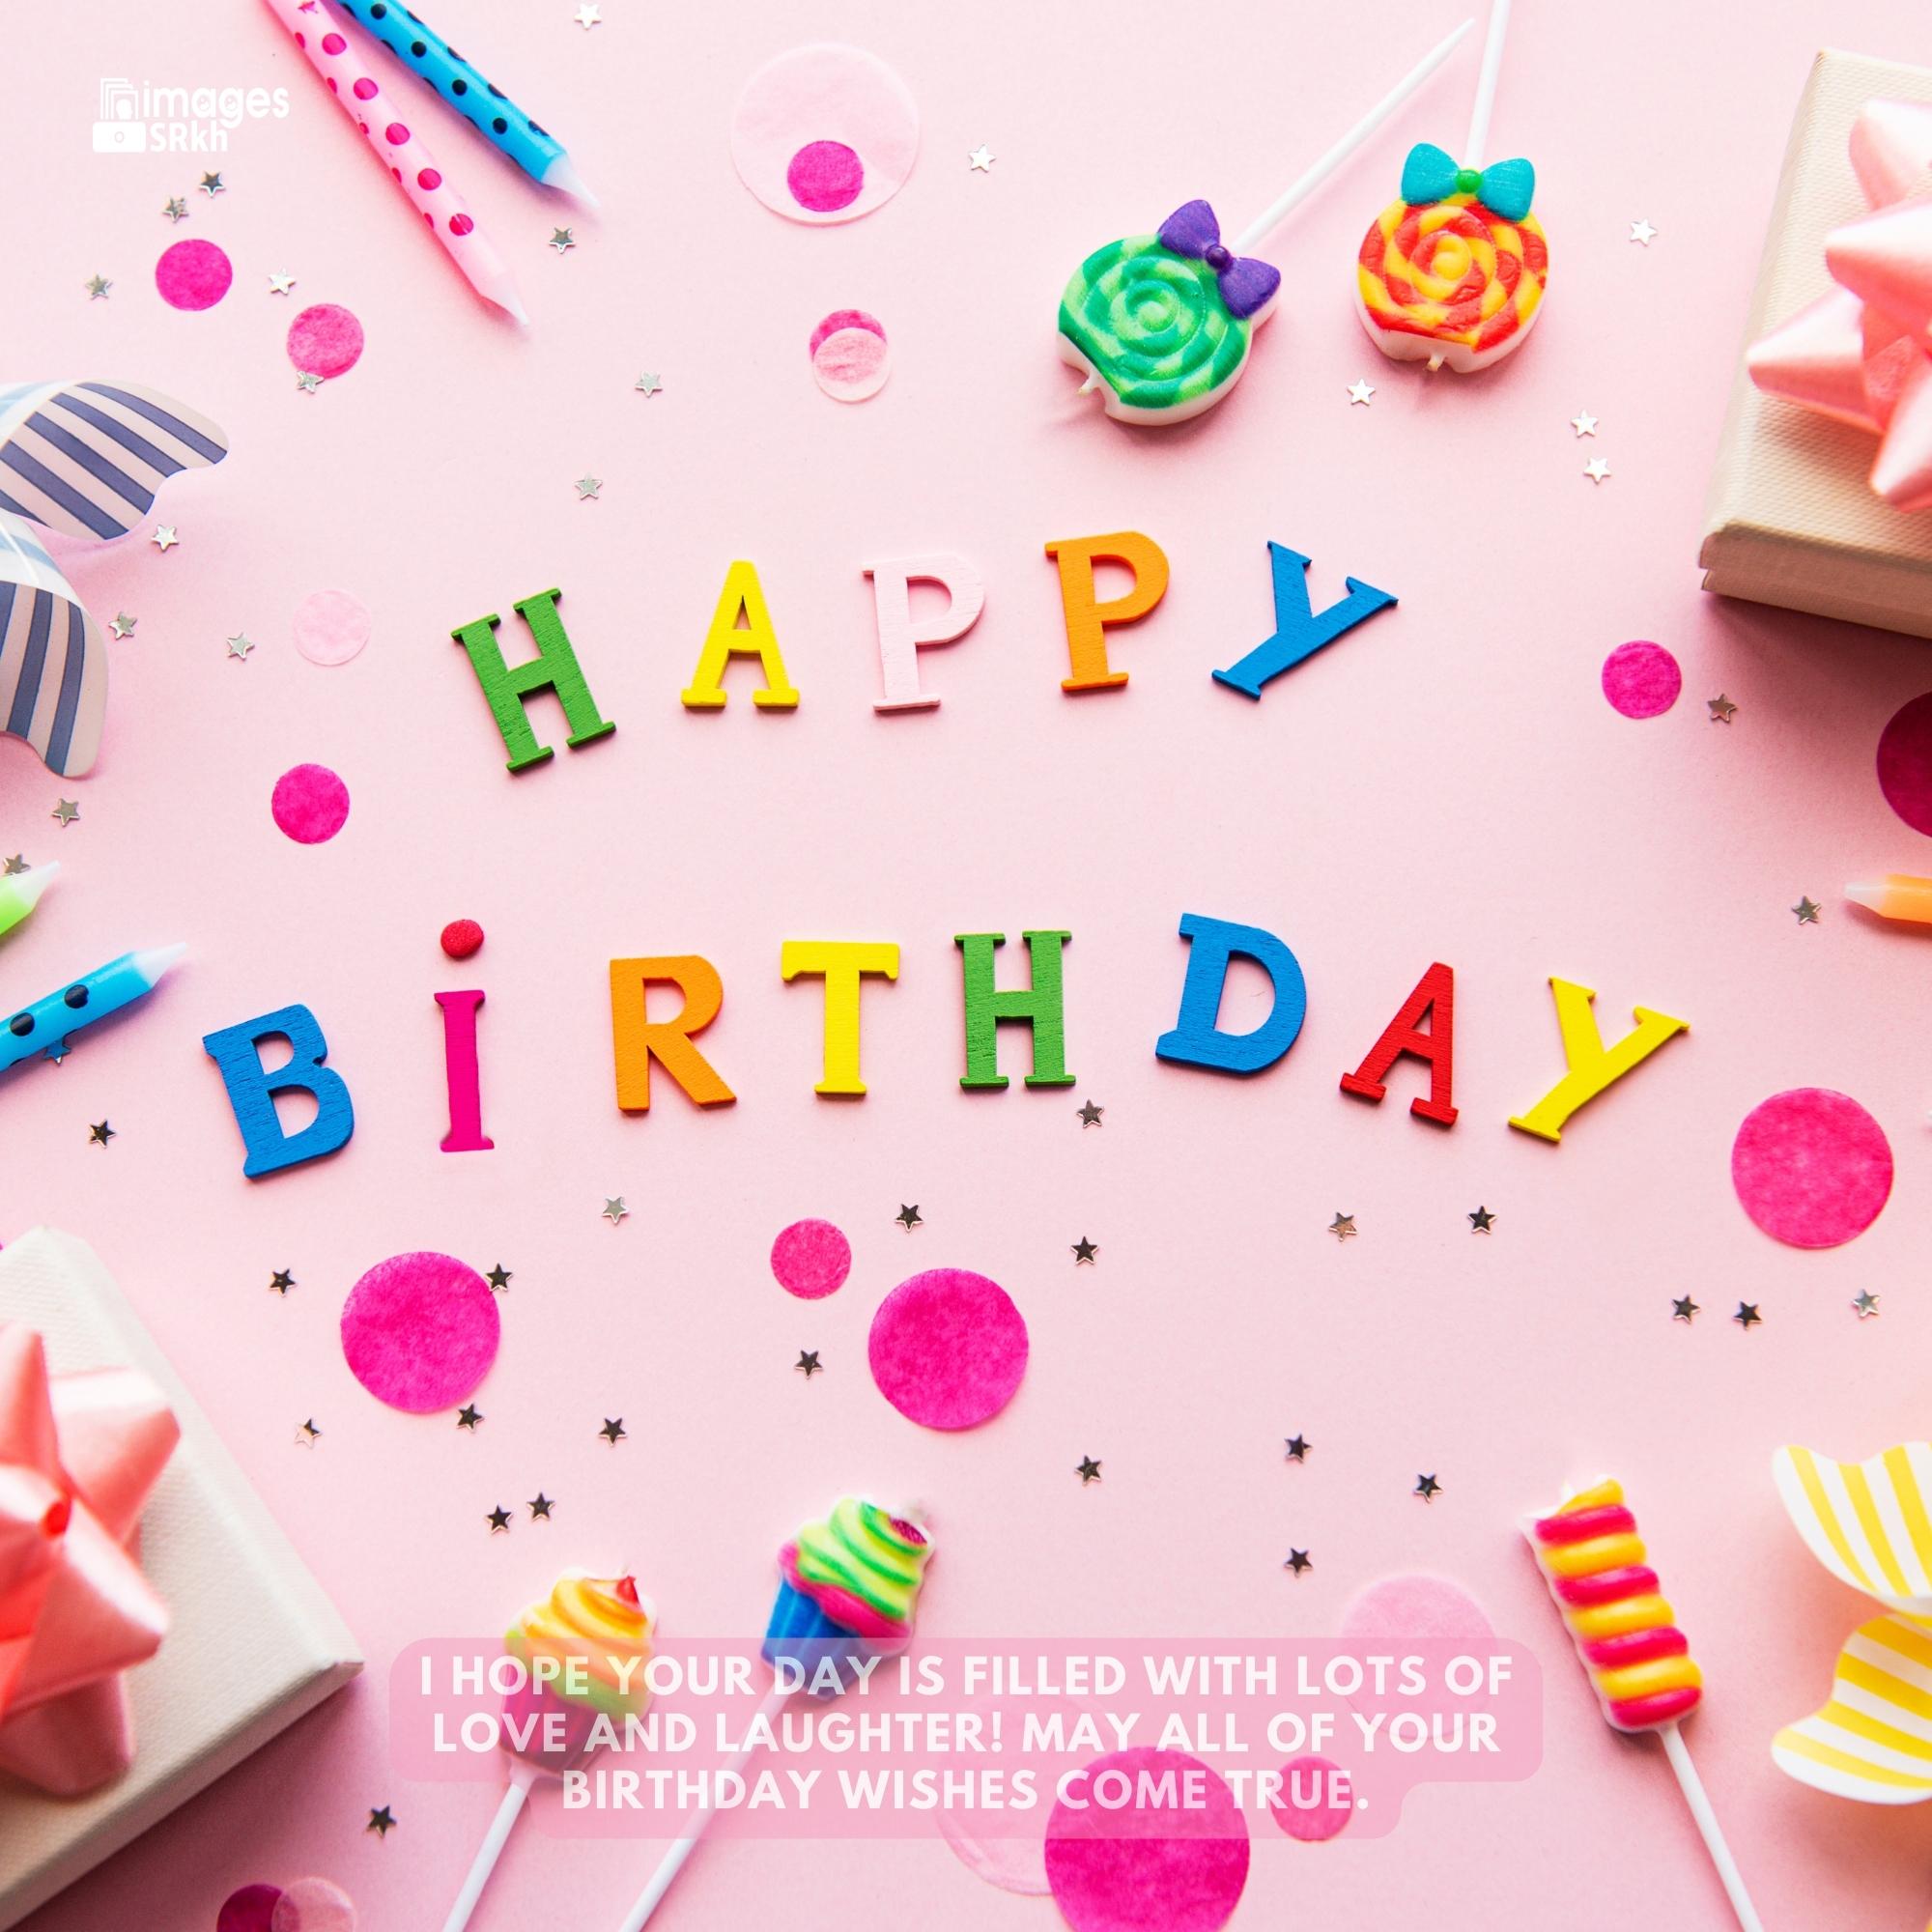 Happy Birthday Images With Quote